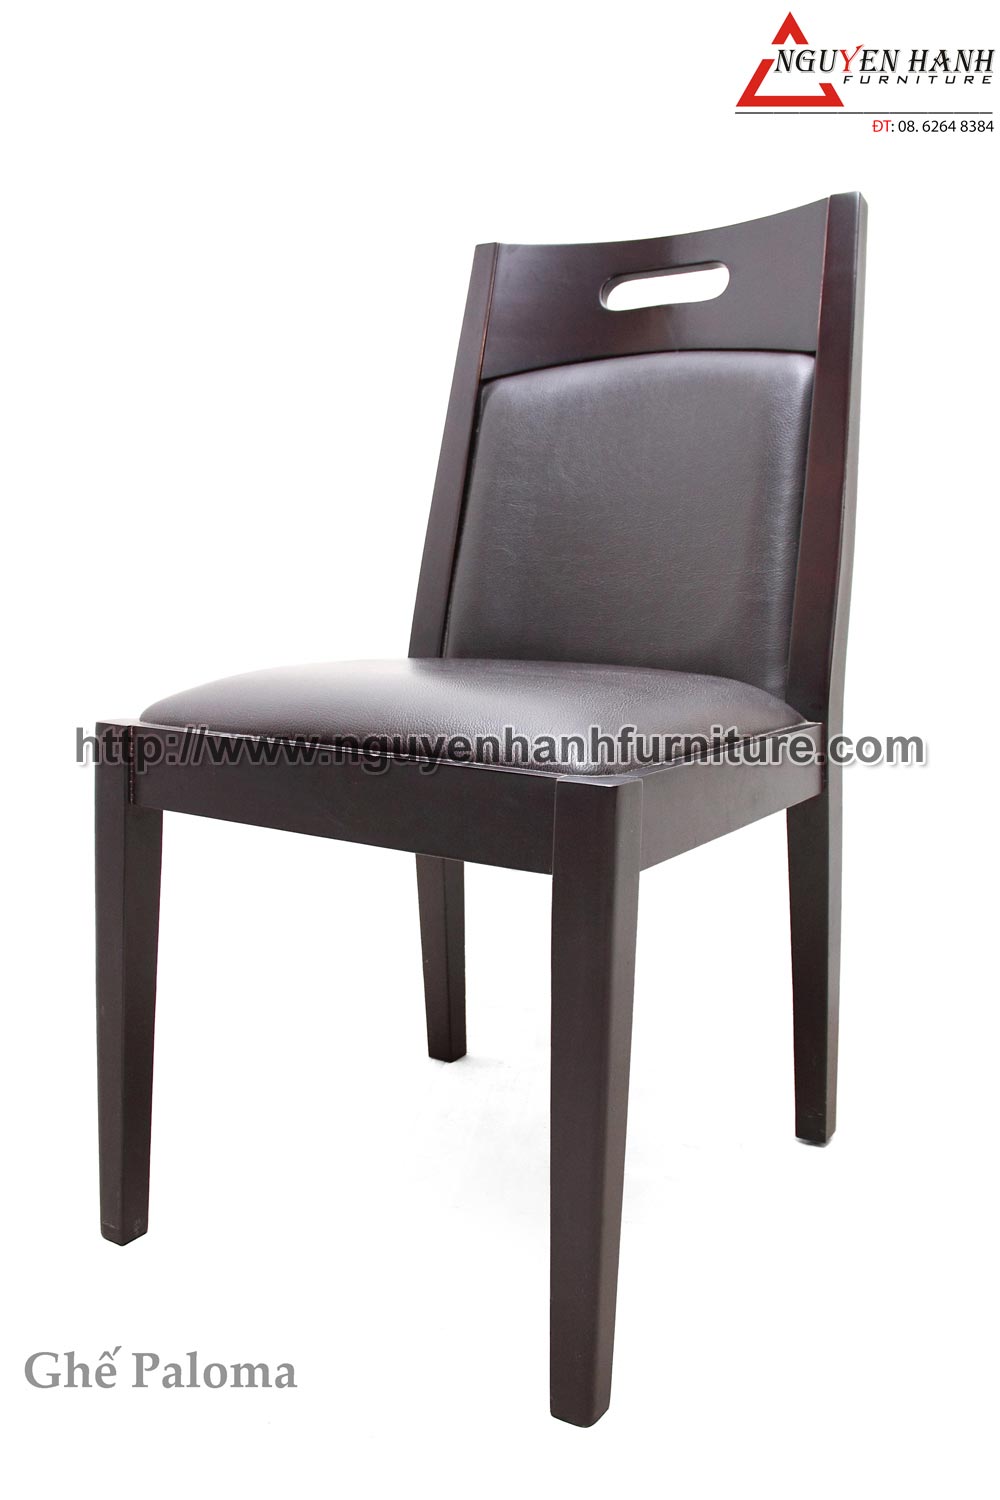 Name product: paloma chair- Dimensions:  - Description: Rubber wood, the mattress